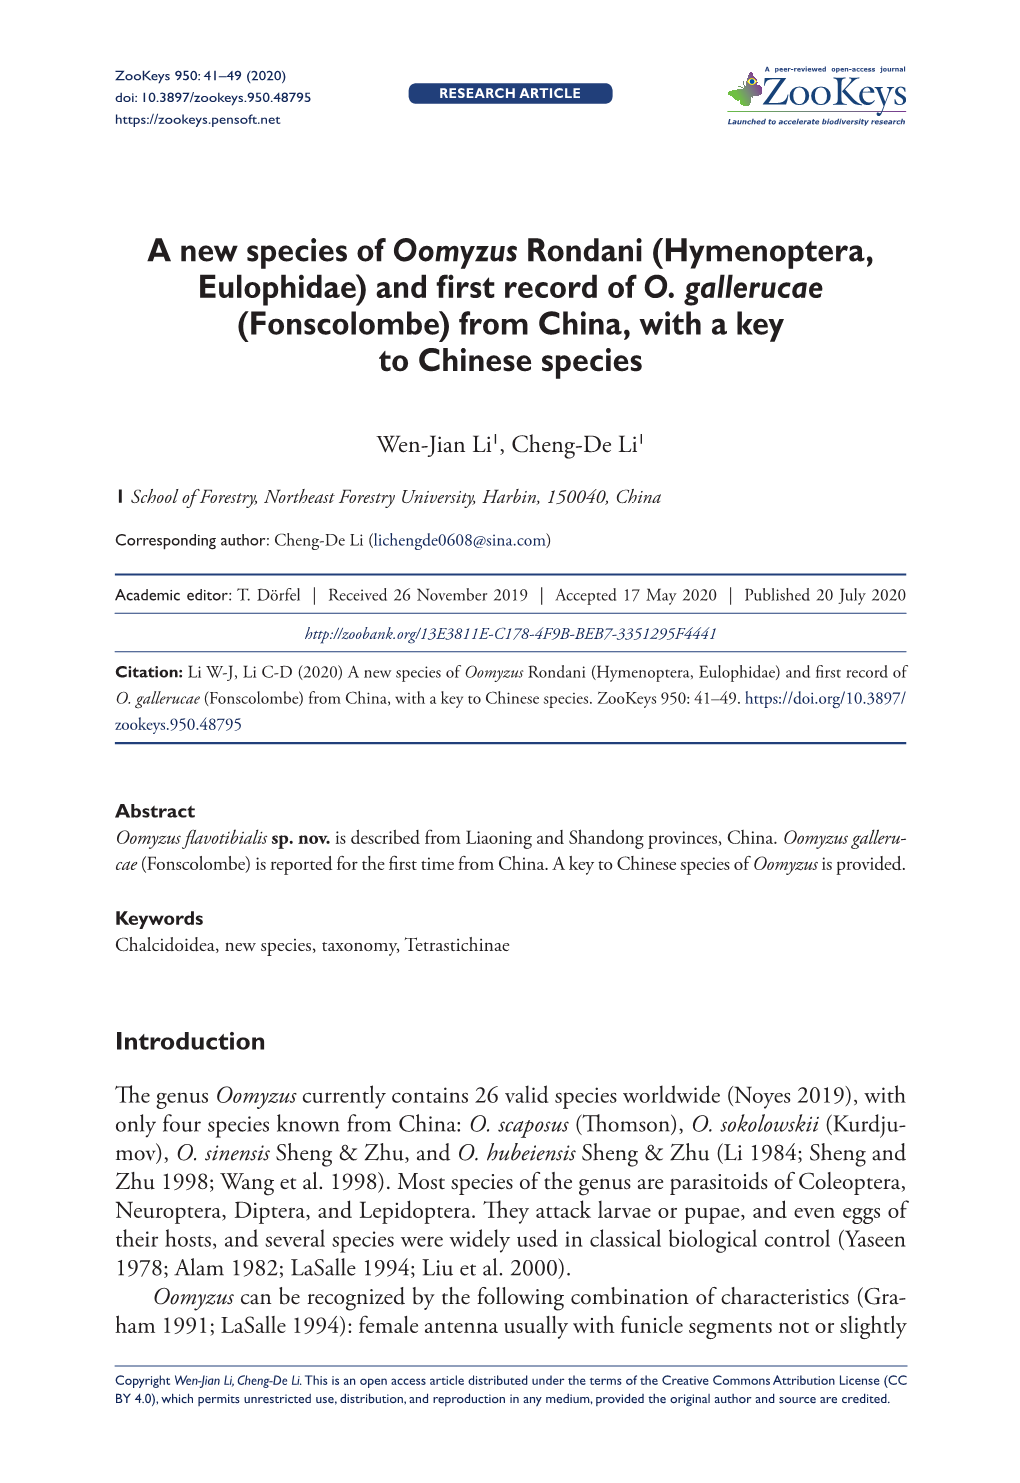 A New Species of Oomyzus Rondani (Hymenoptera, Eulophidae) and First Record of O